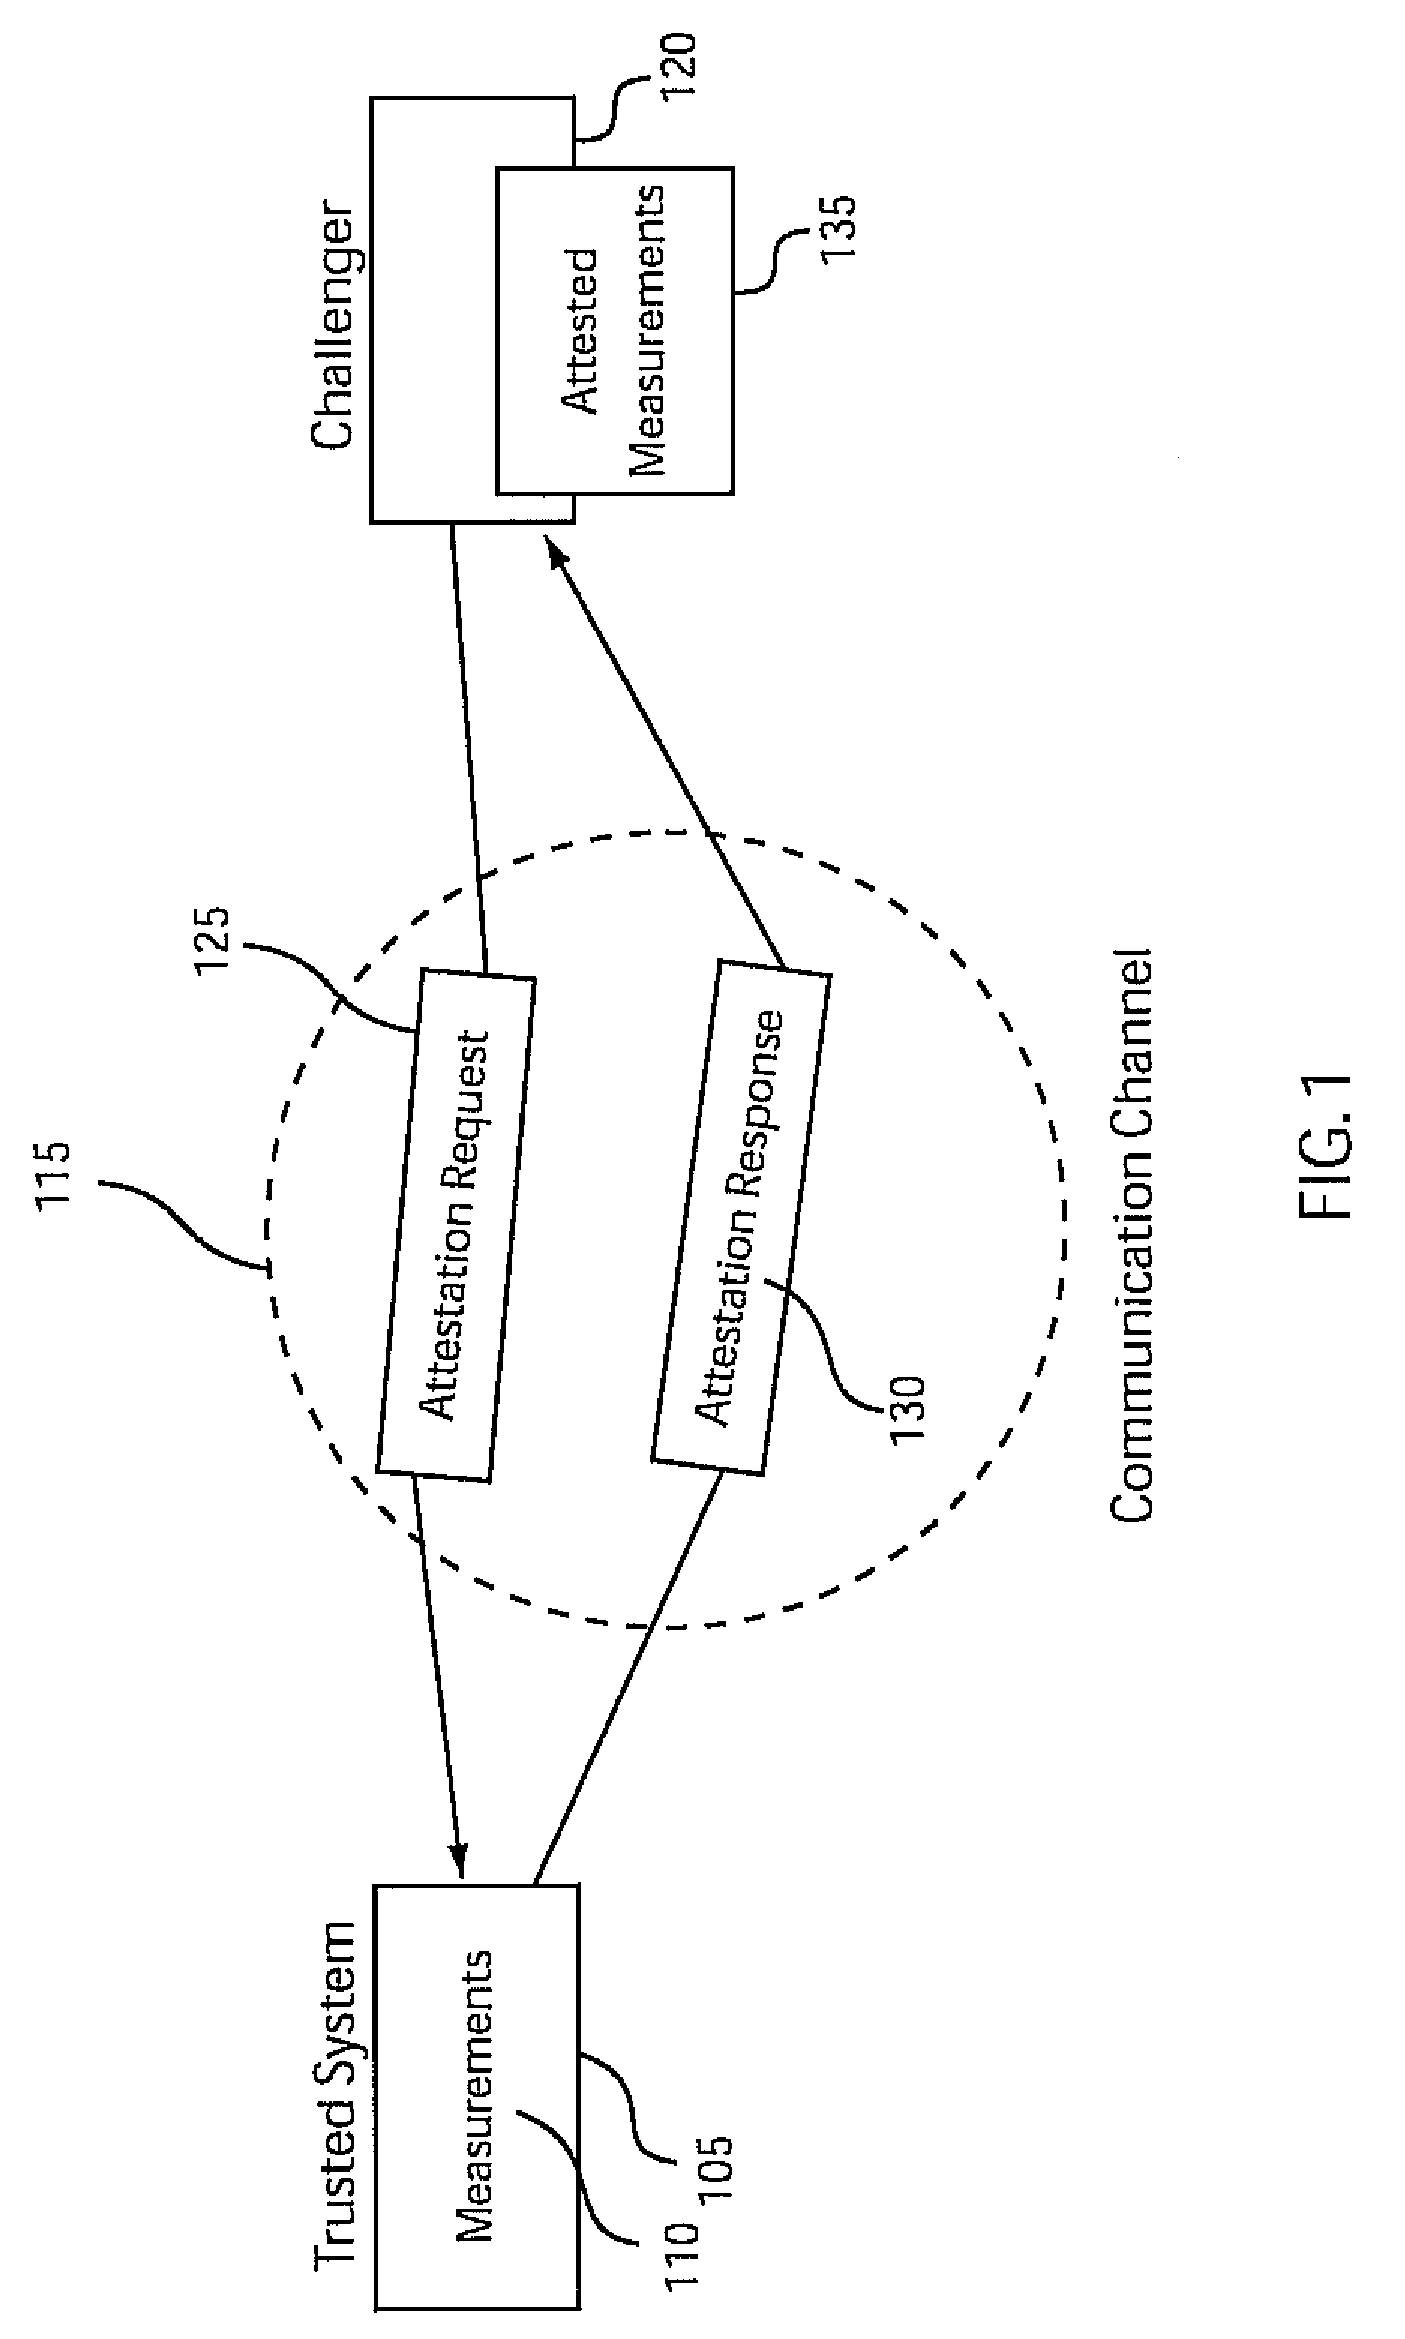 Method and system for measuring status and state of remotely executing programs